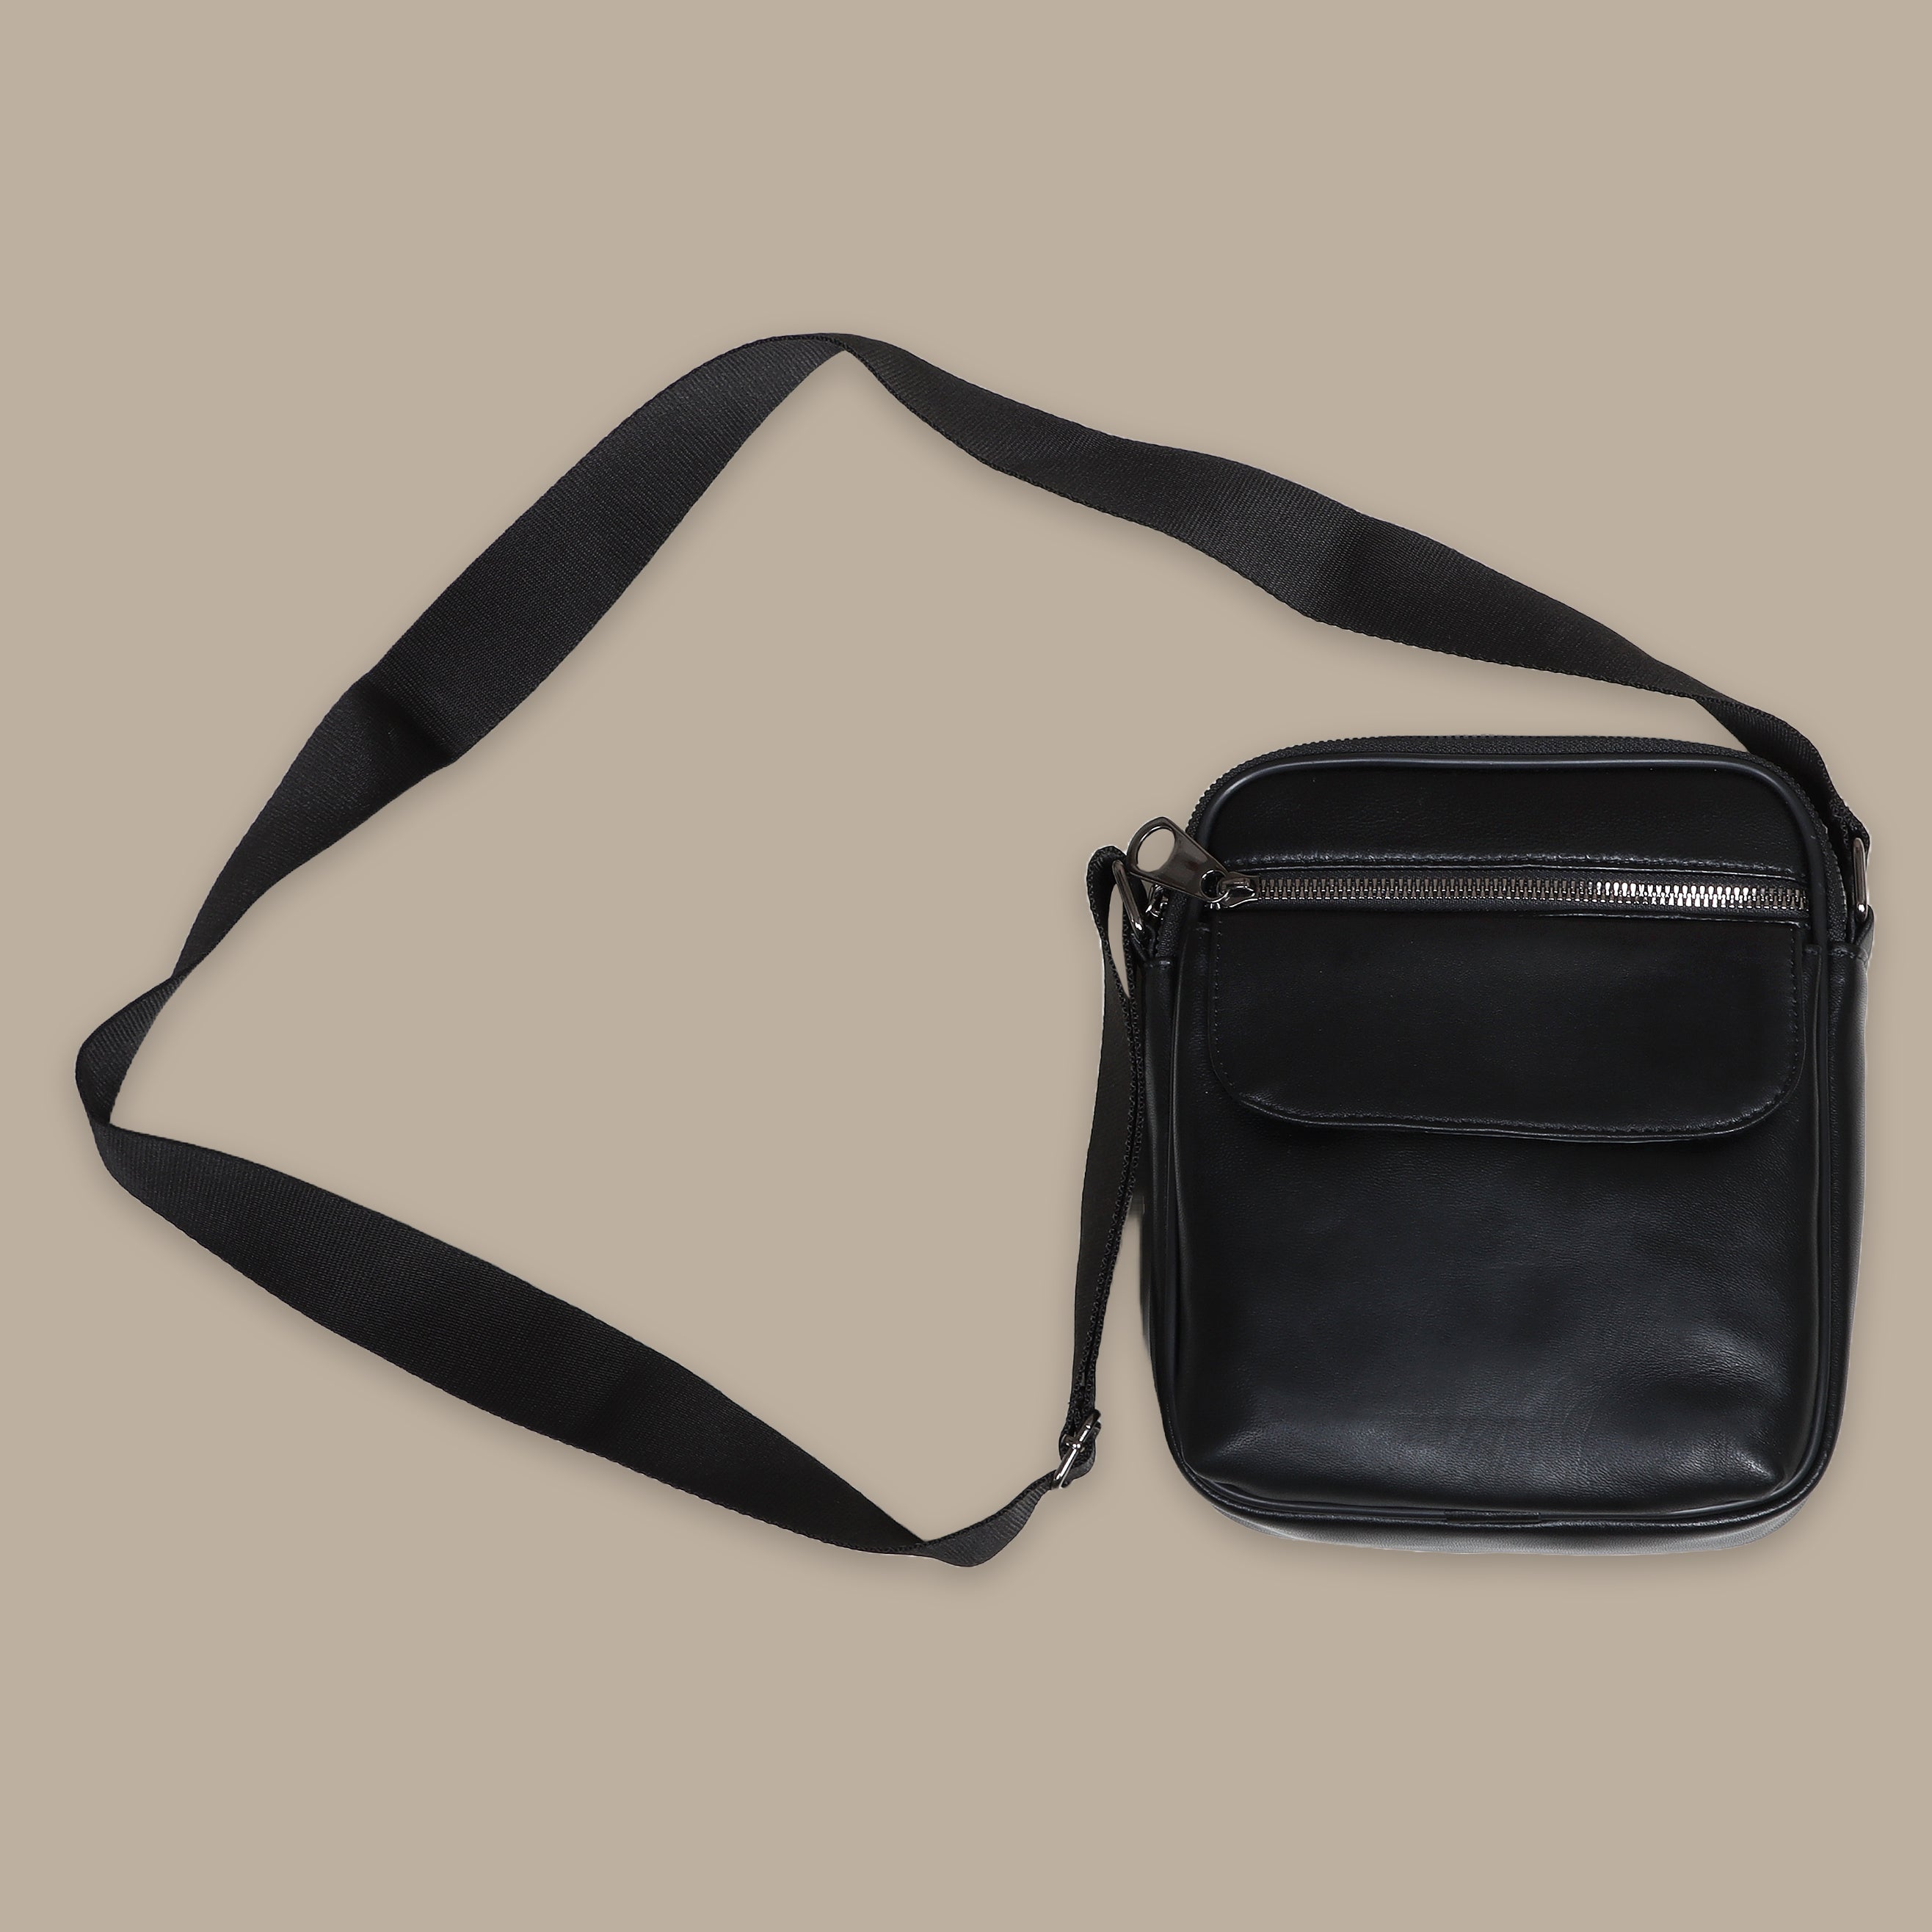 Nocturnal Utility: Black Leather Crossbody with Flap Pockets and Triple Zippers